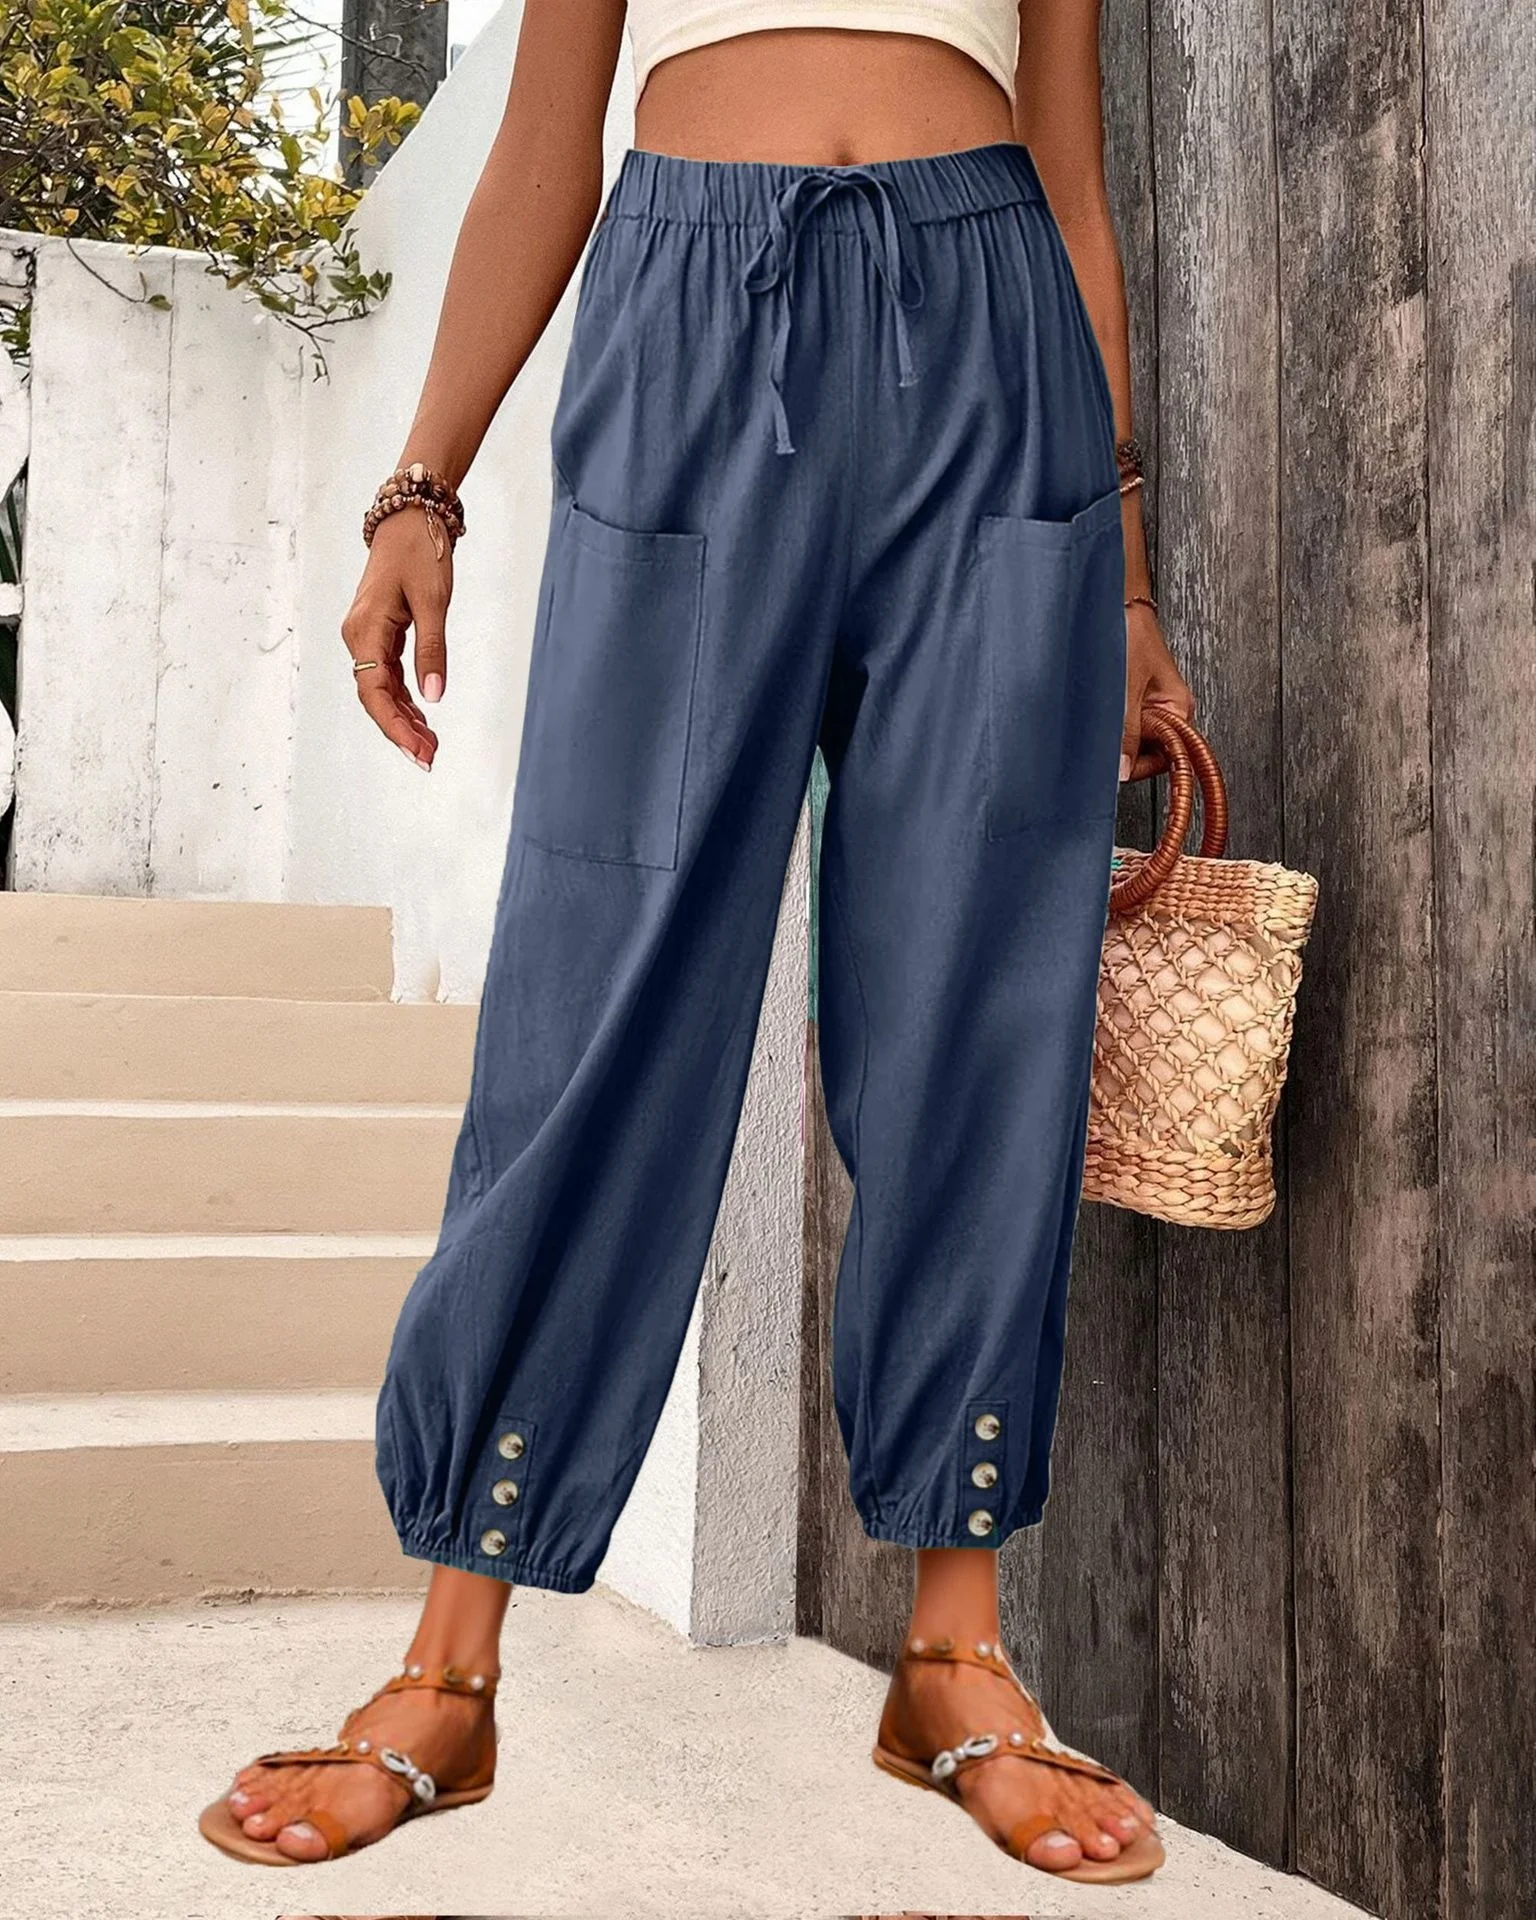 

Women Loose Fitting High Waisted Buttoned Cotton Linen Pants Fashion Wide Leg Cropped Pants Drawstring Elastic Waist Trousers